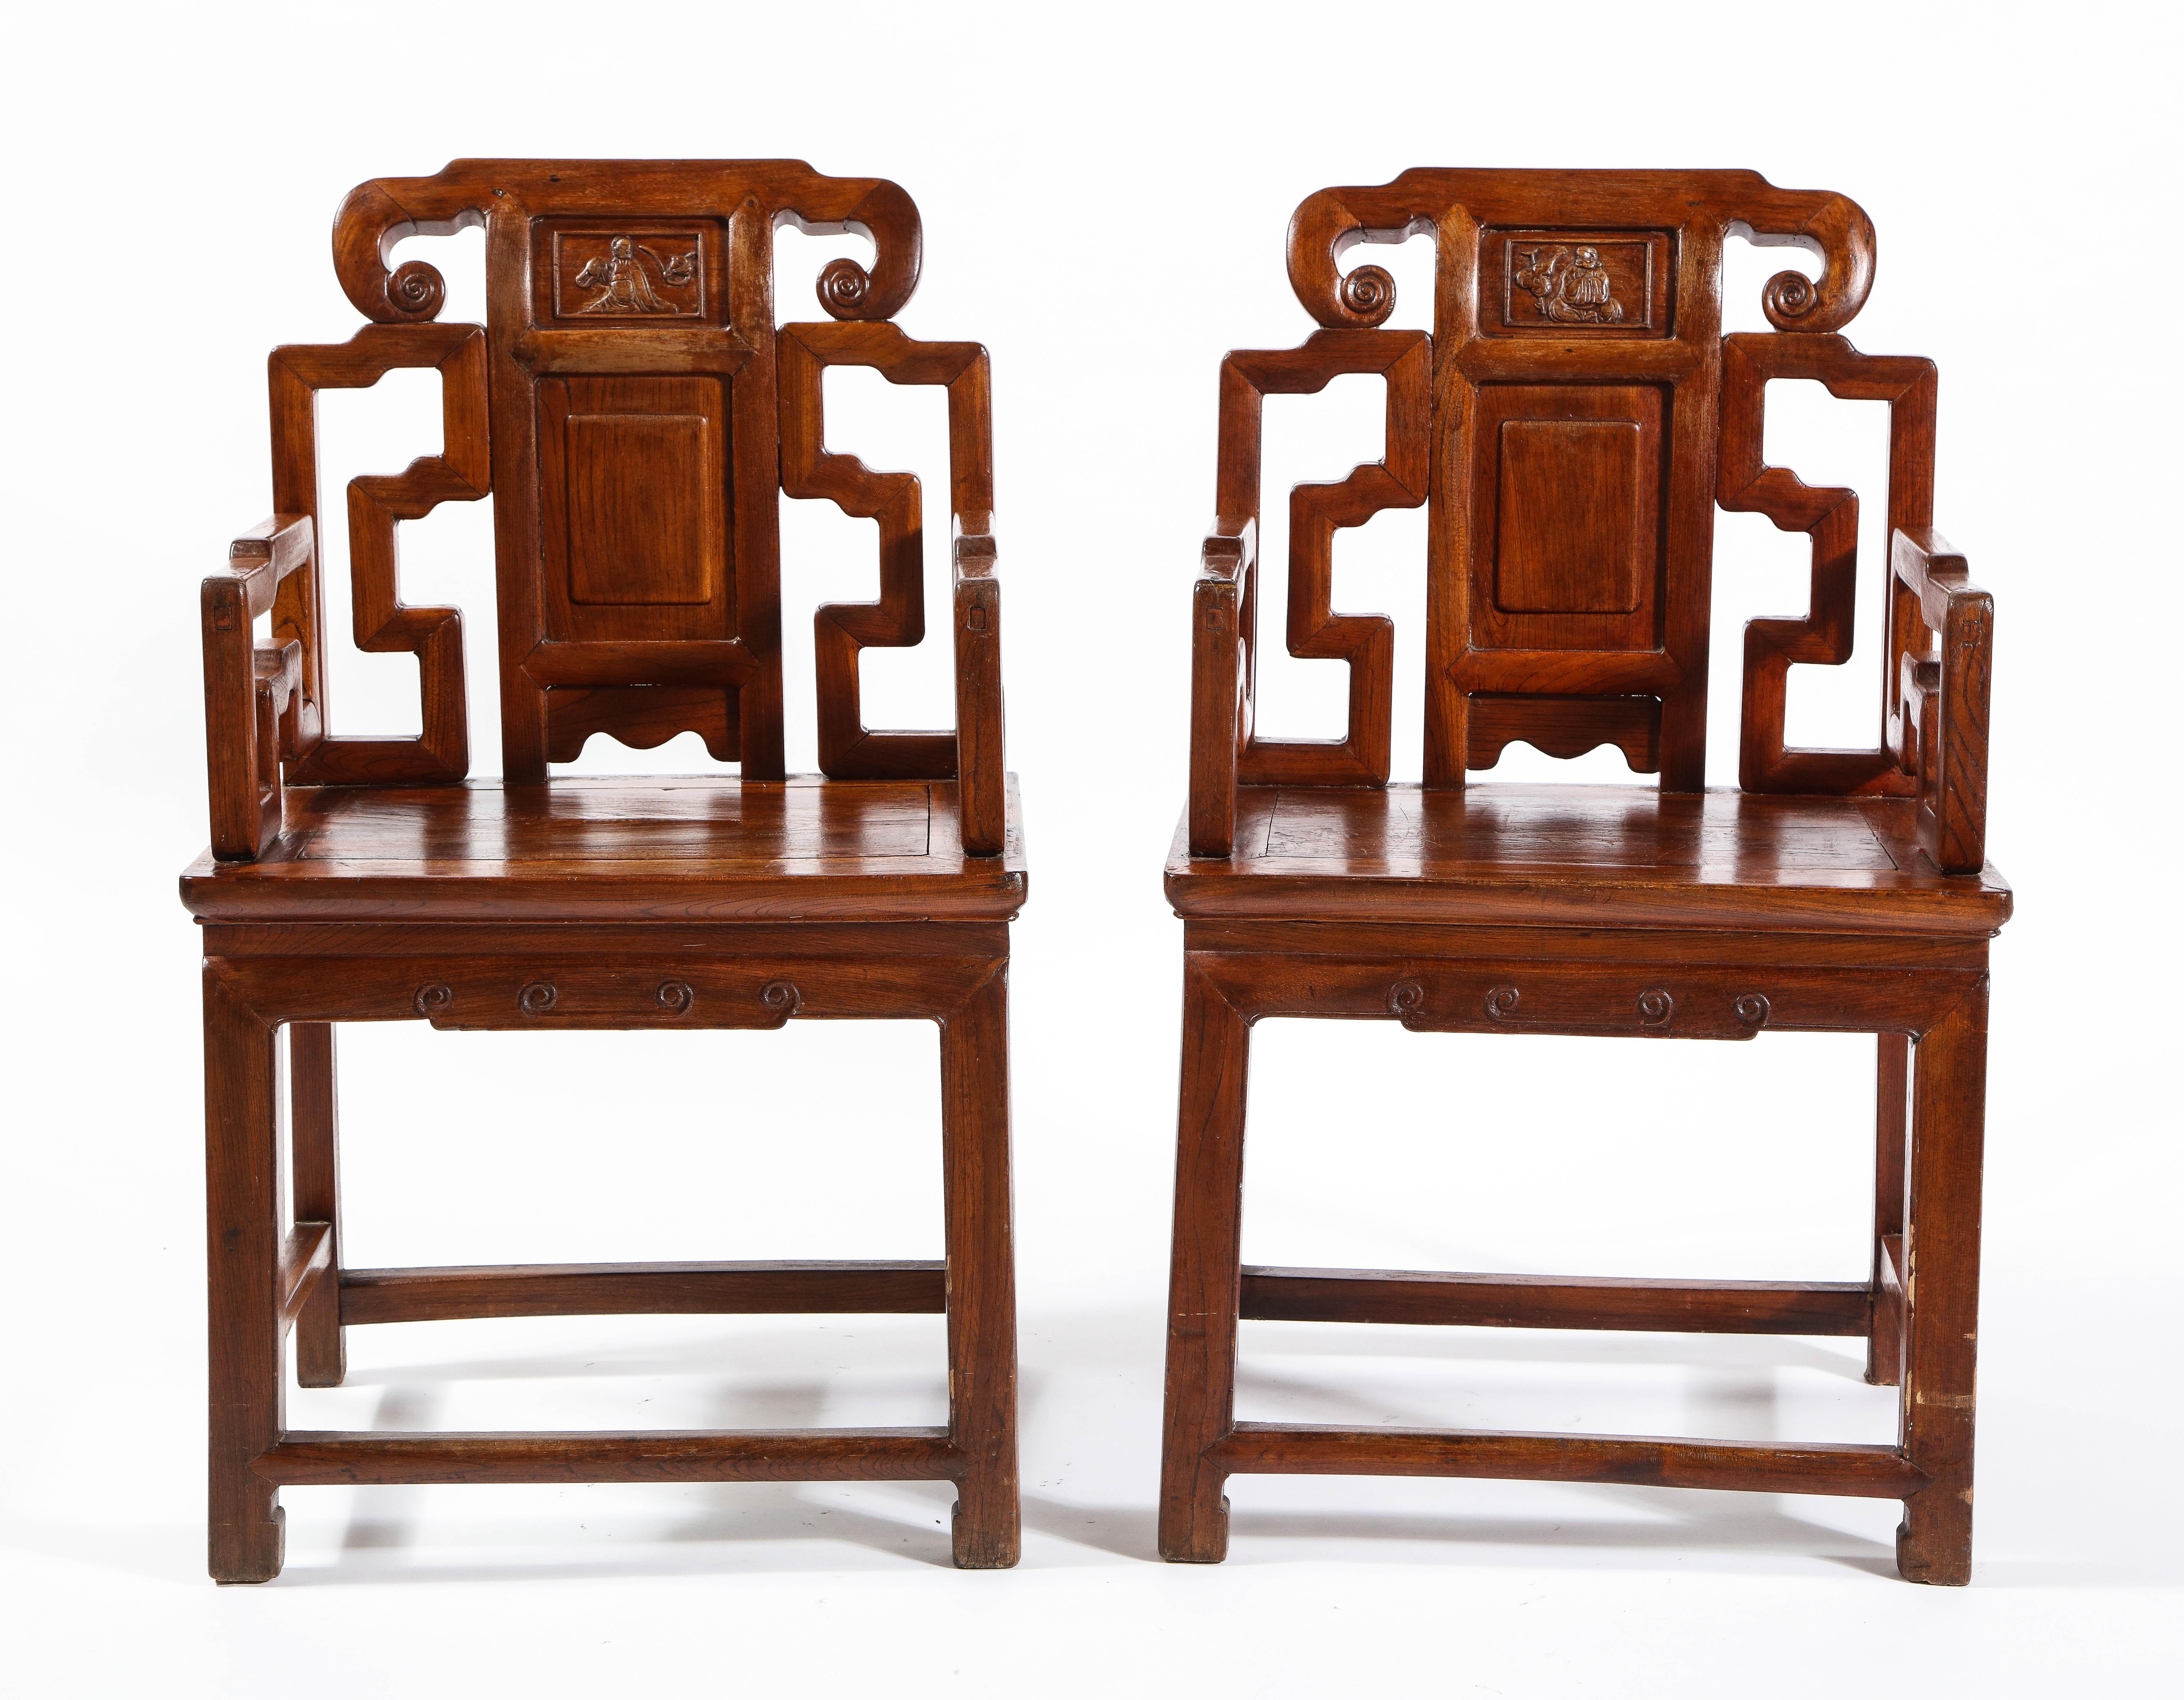 A pair of antique Chinese hardwood chairs with Fretwork designs and high relief panels. Each chair is beautifully hand carved with exceptional detail and craftsmanship. The wood is of the finest quality and has a gorgeous deep colored grain. On the